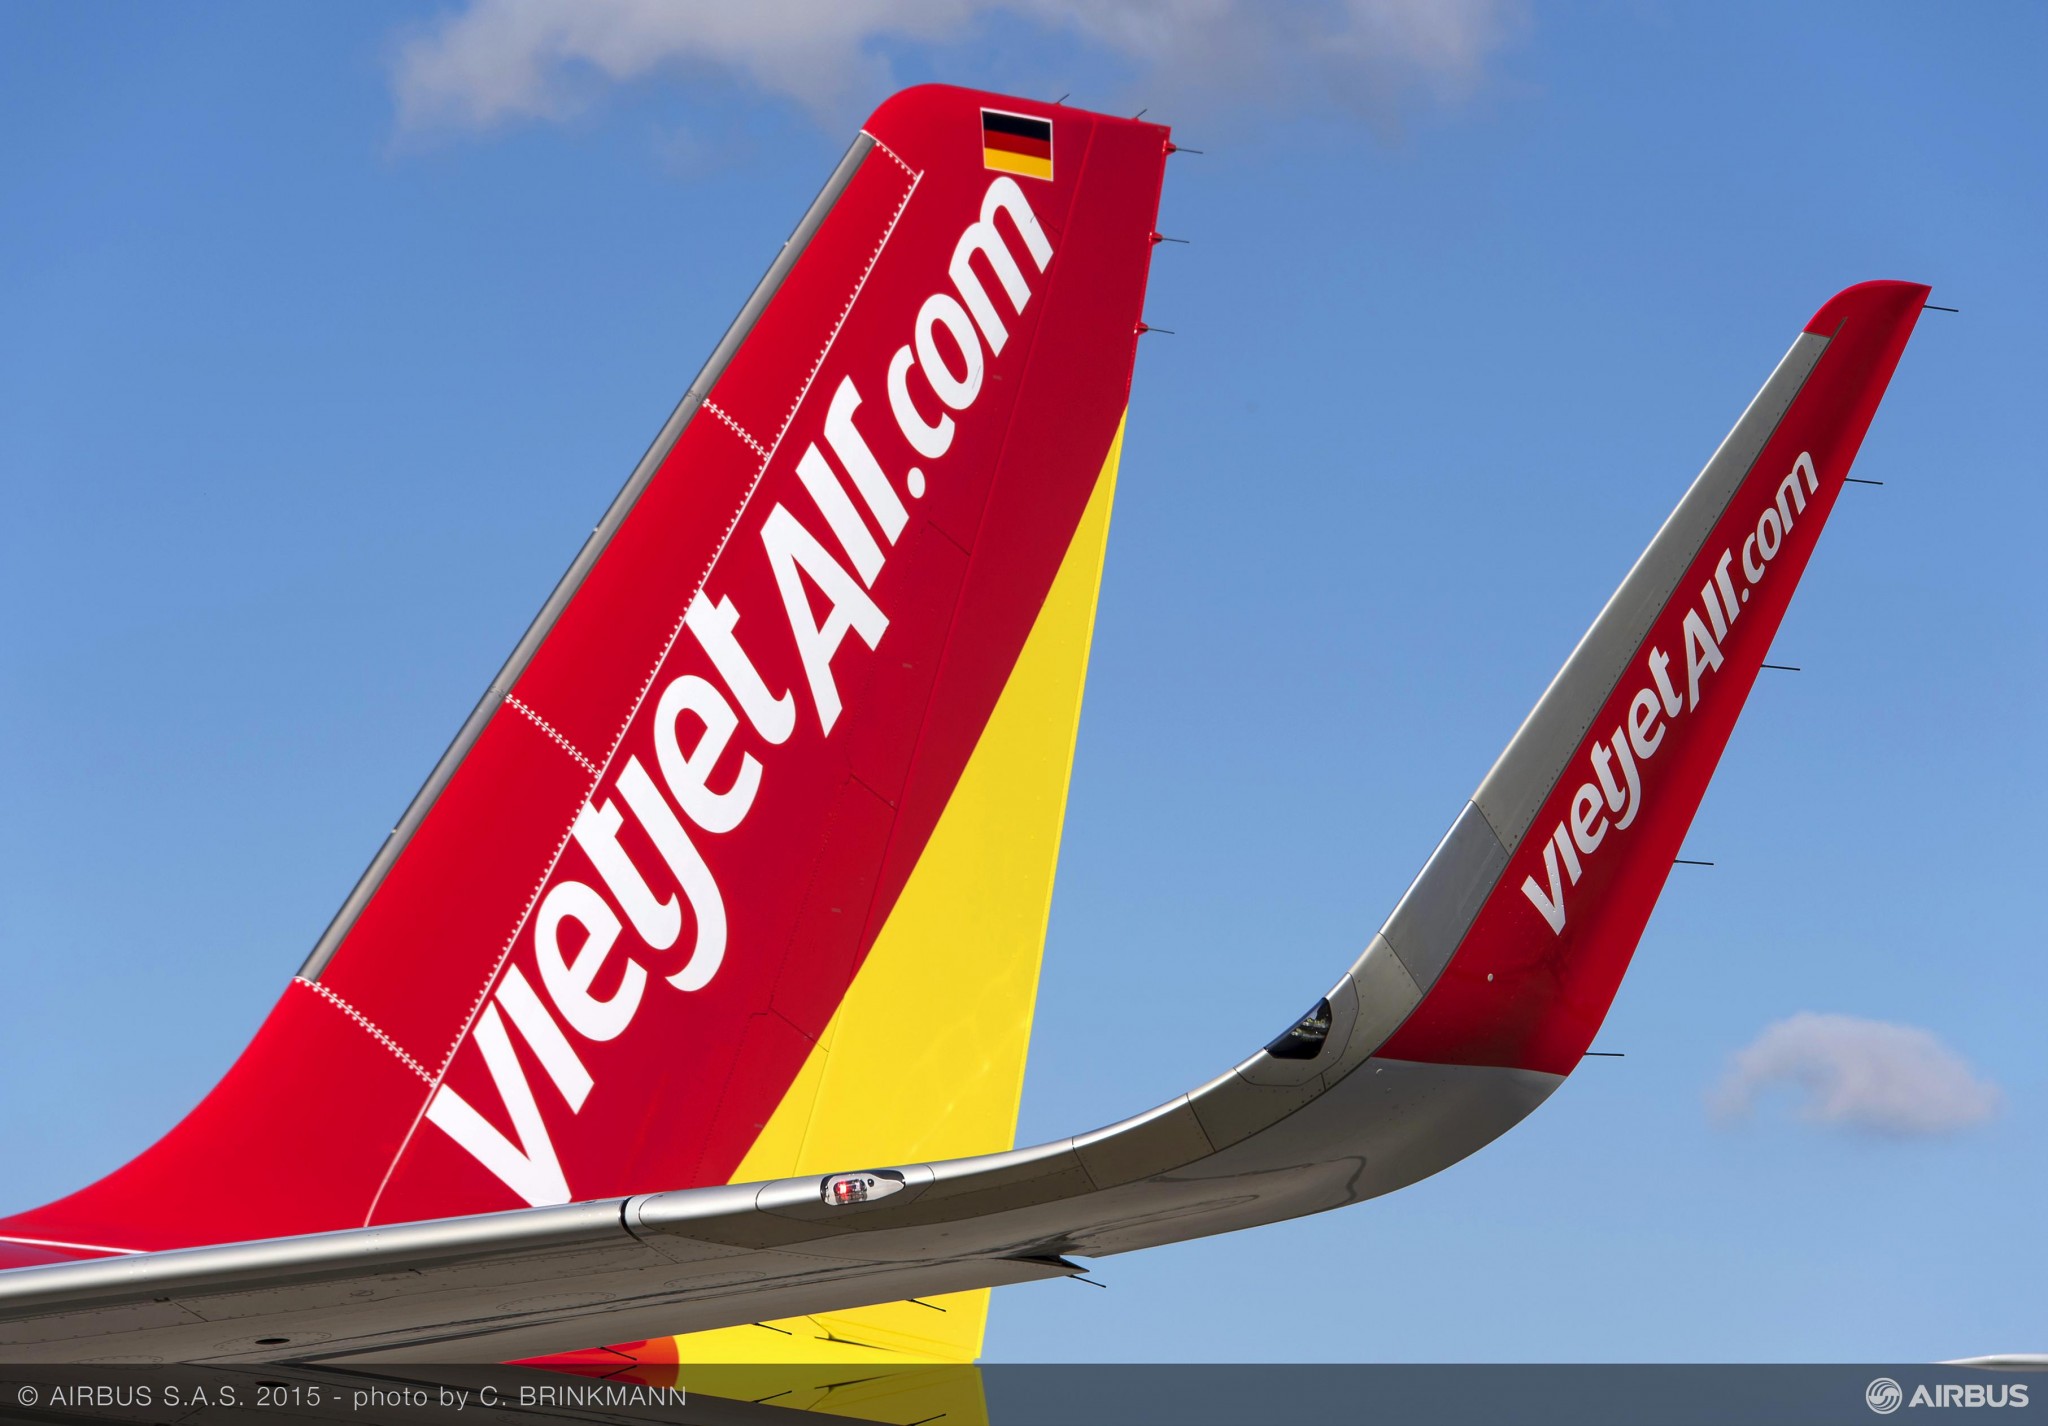 Vietjet seeks shareholders opinion on dividend payout increase for 2017